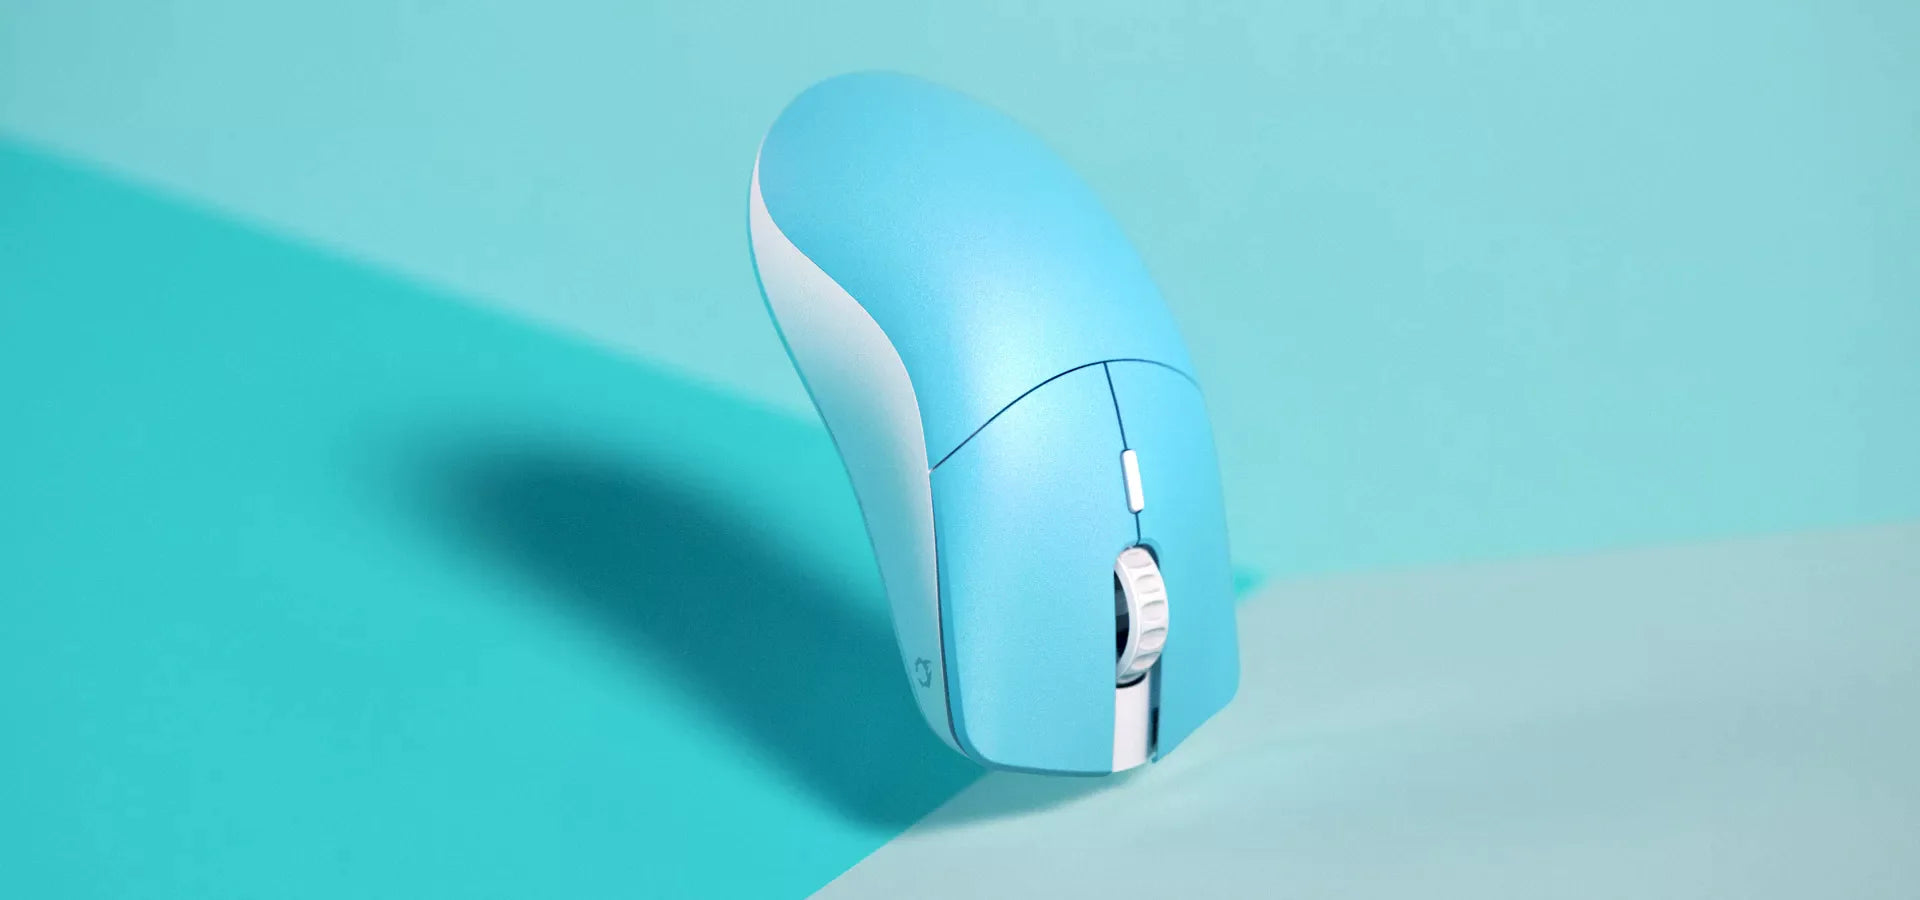 Glorious Model O PRO Wireless Mouse - Blue Lynx - Forge